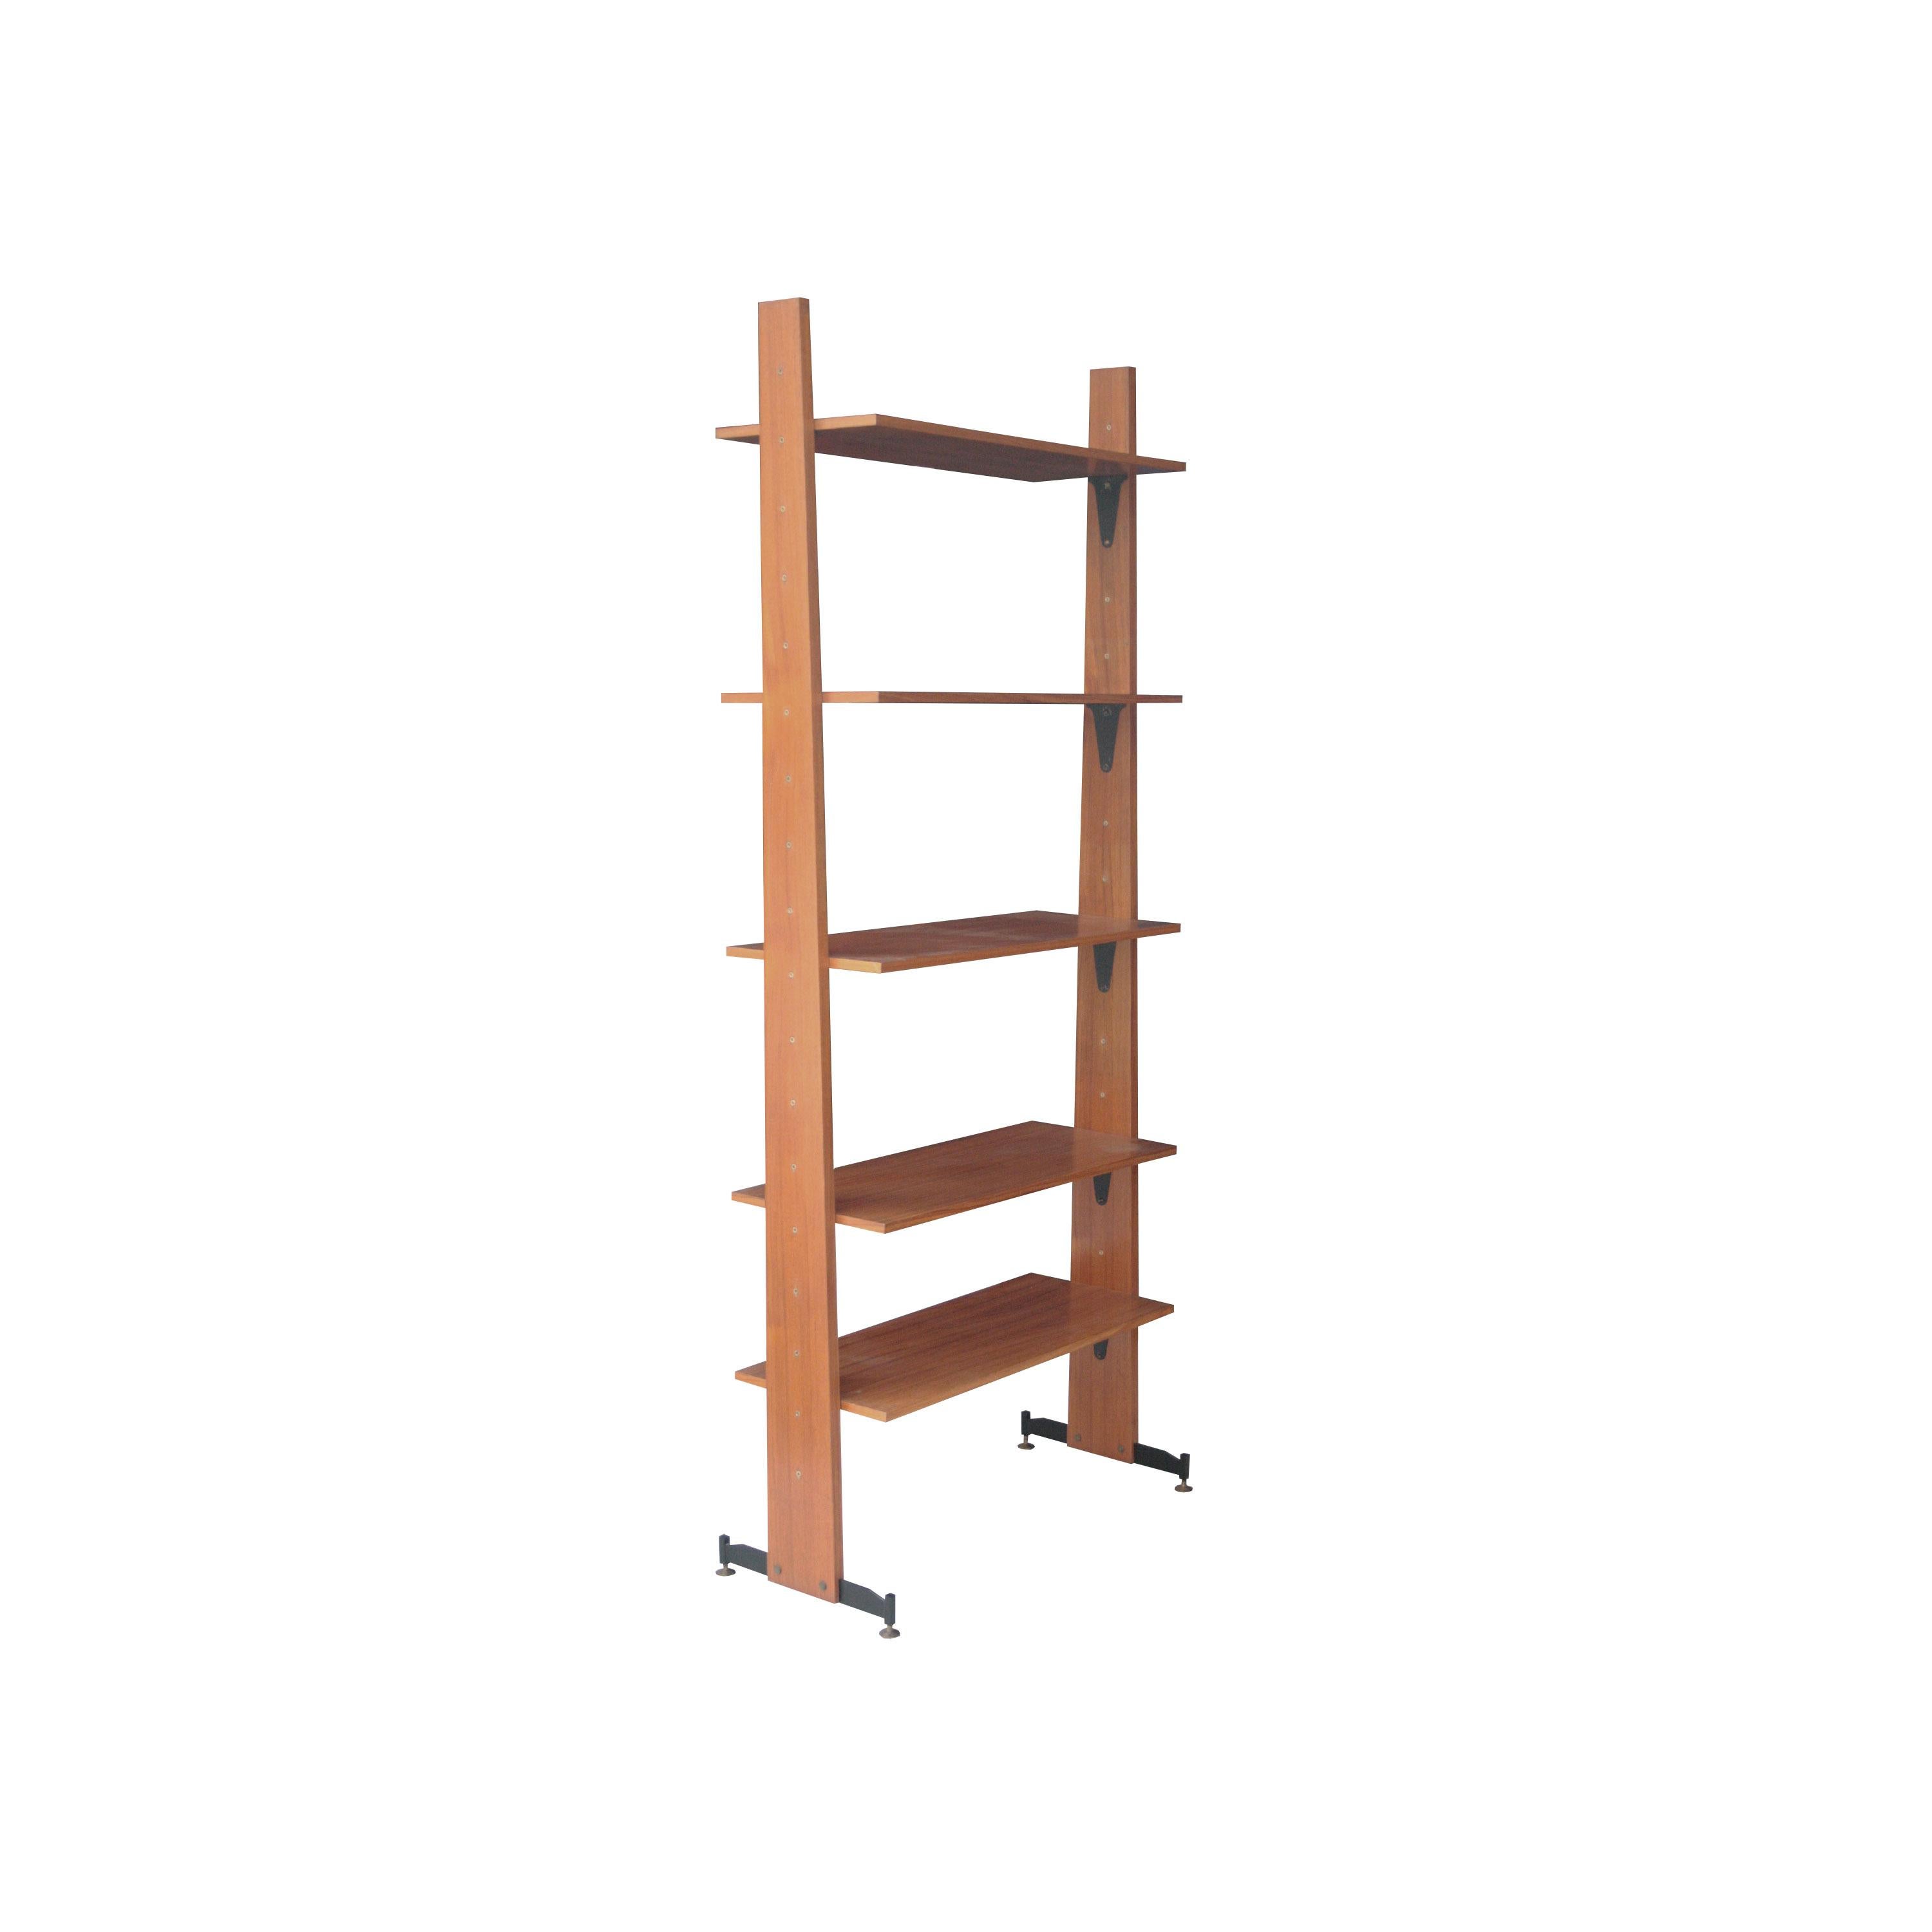 Teak shelf with adjustable shelves in height, black lacquered metal feet and brass height adjustable pads.